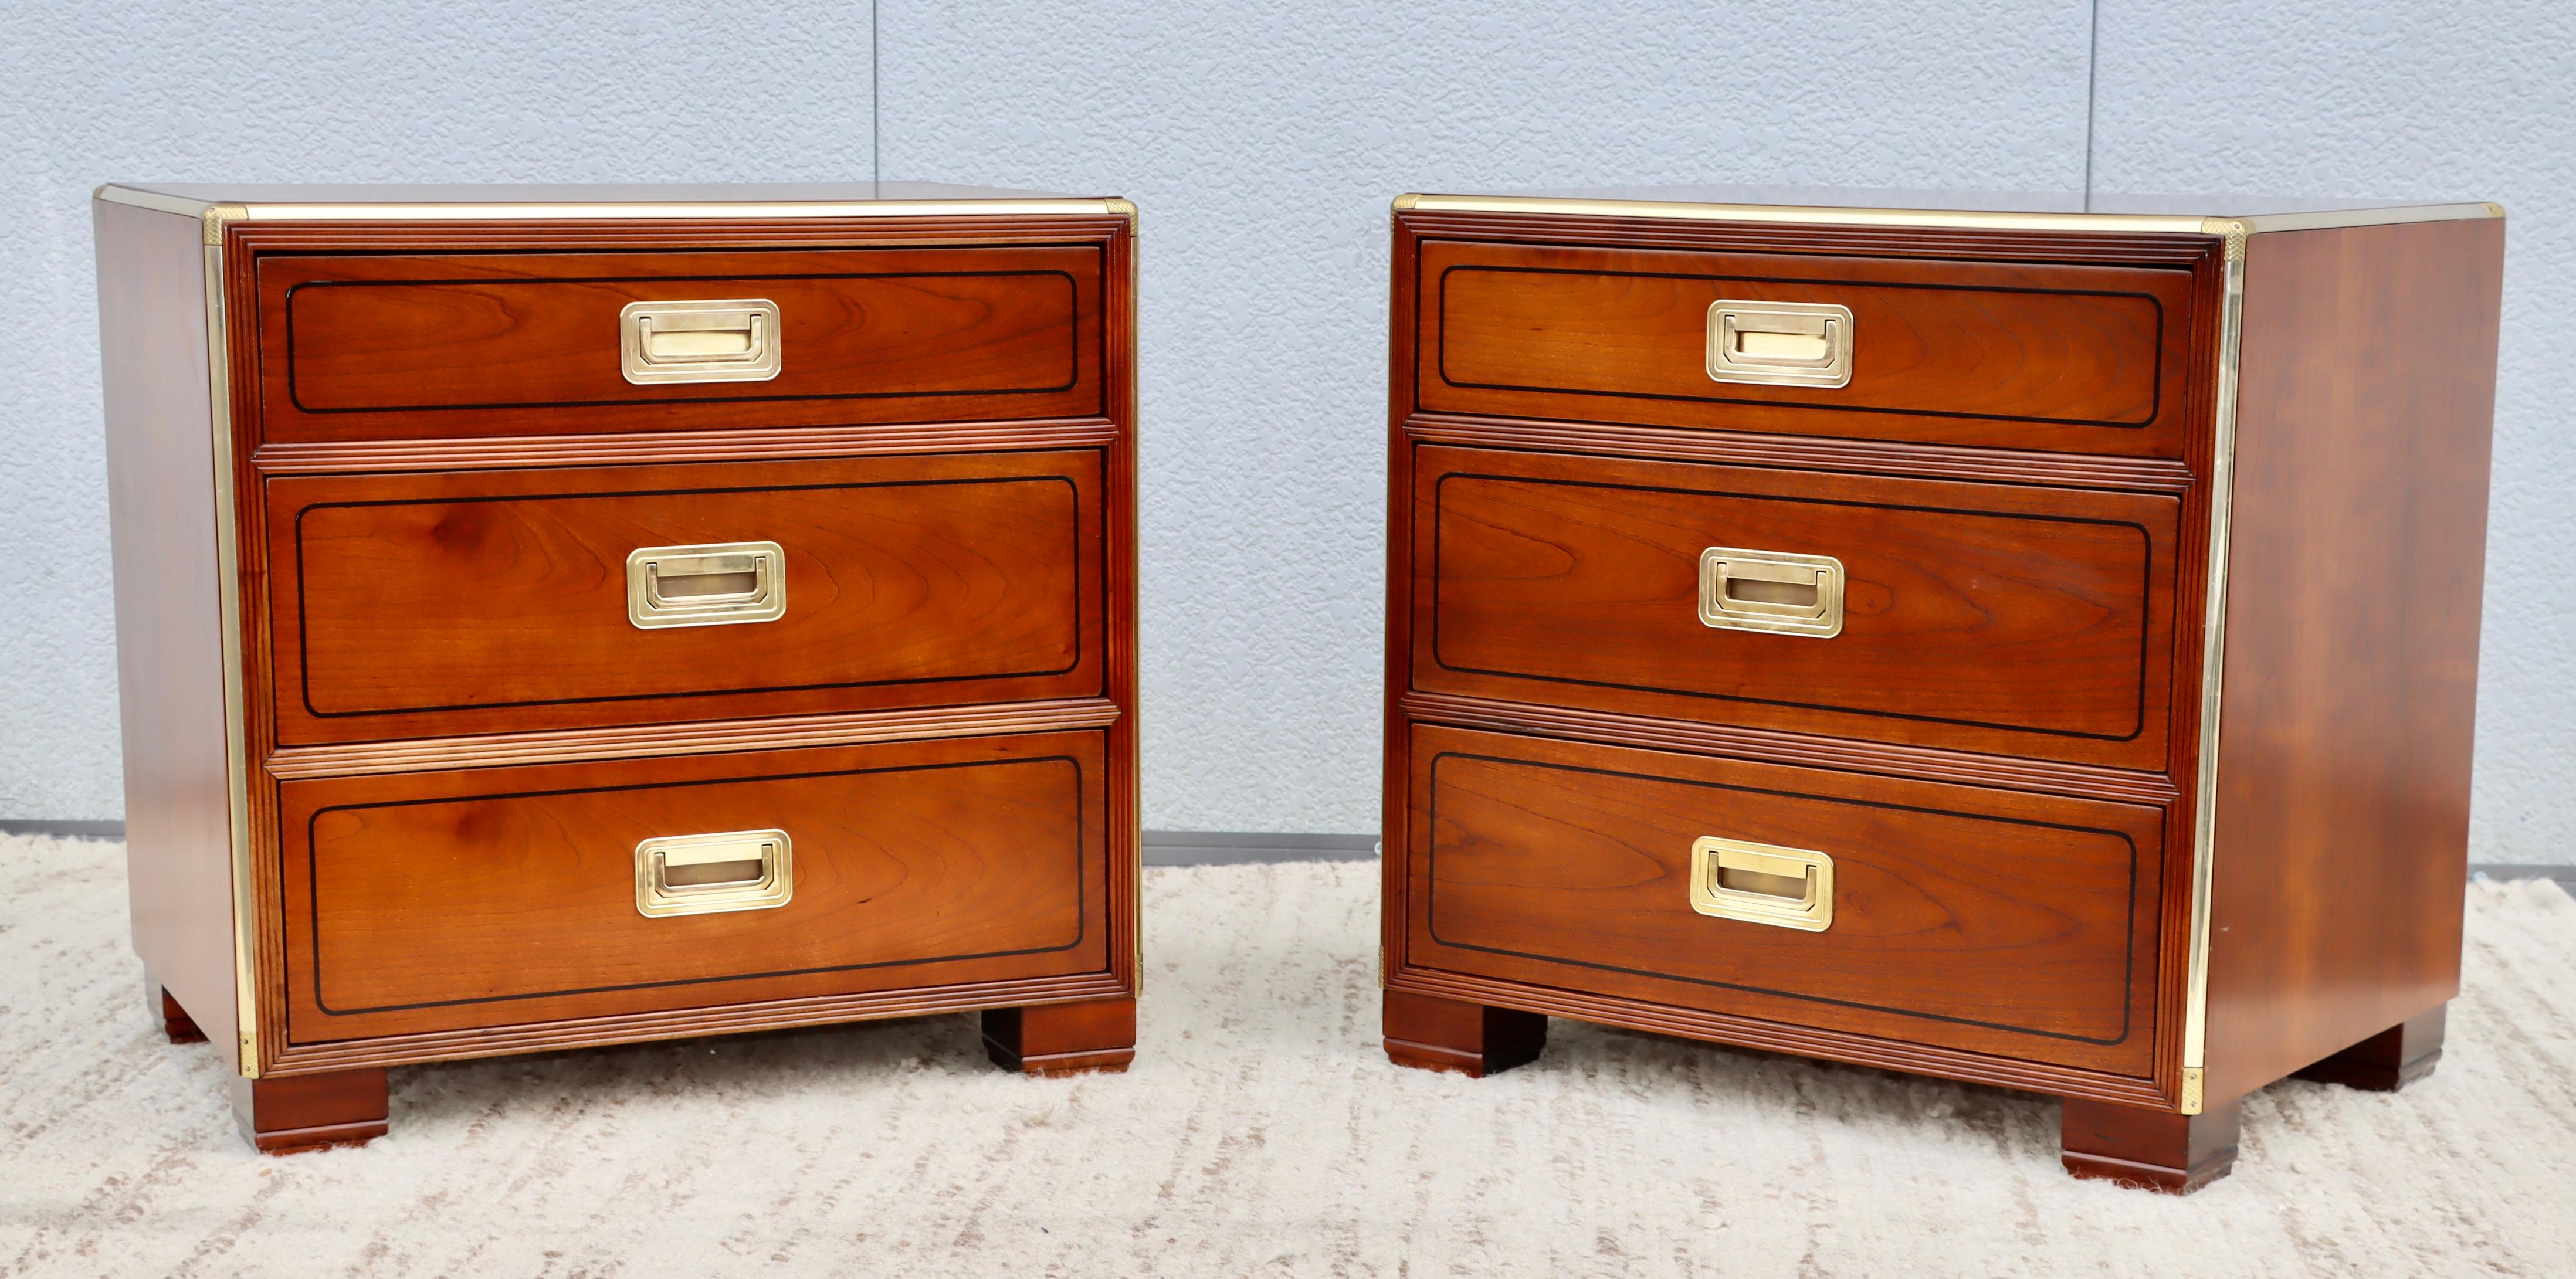 Amazing pair of cherrywood and brass 3 drawer night stand by Baker, newly restored with minor wear and patina due to age and use.